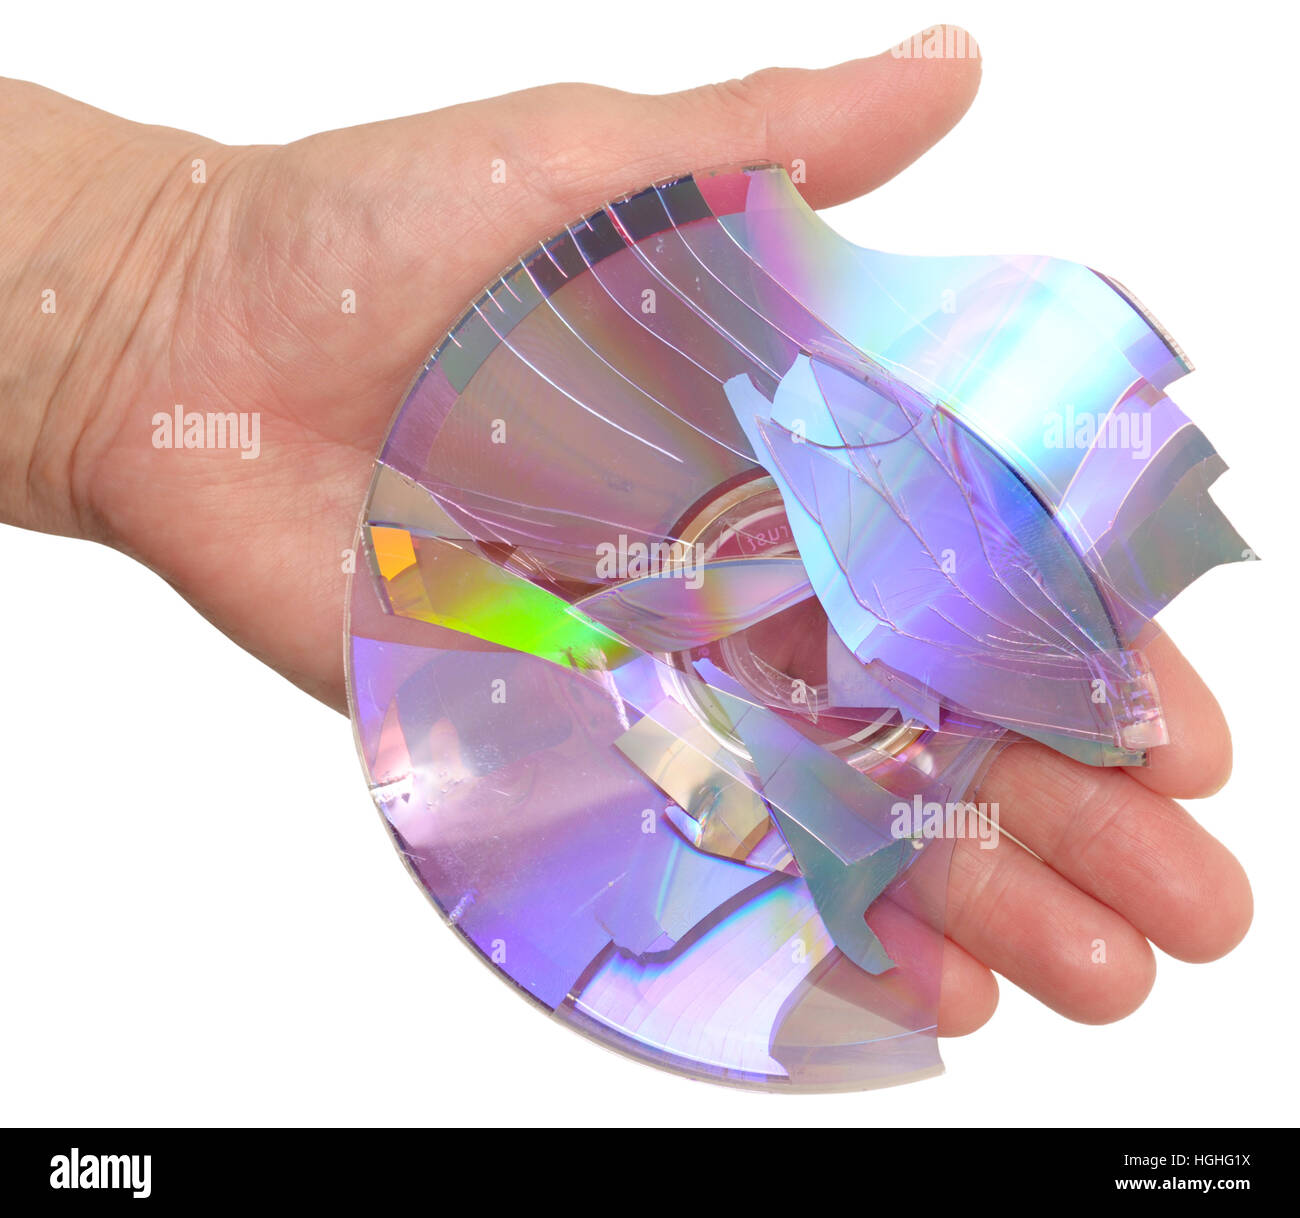 broken cd or dvd disk in hand isolated on white Stock Photo